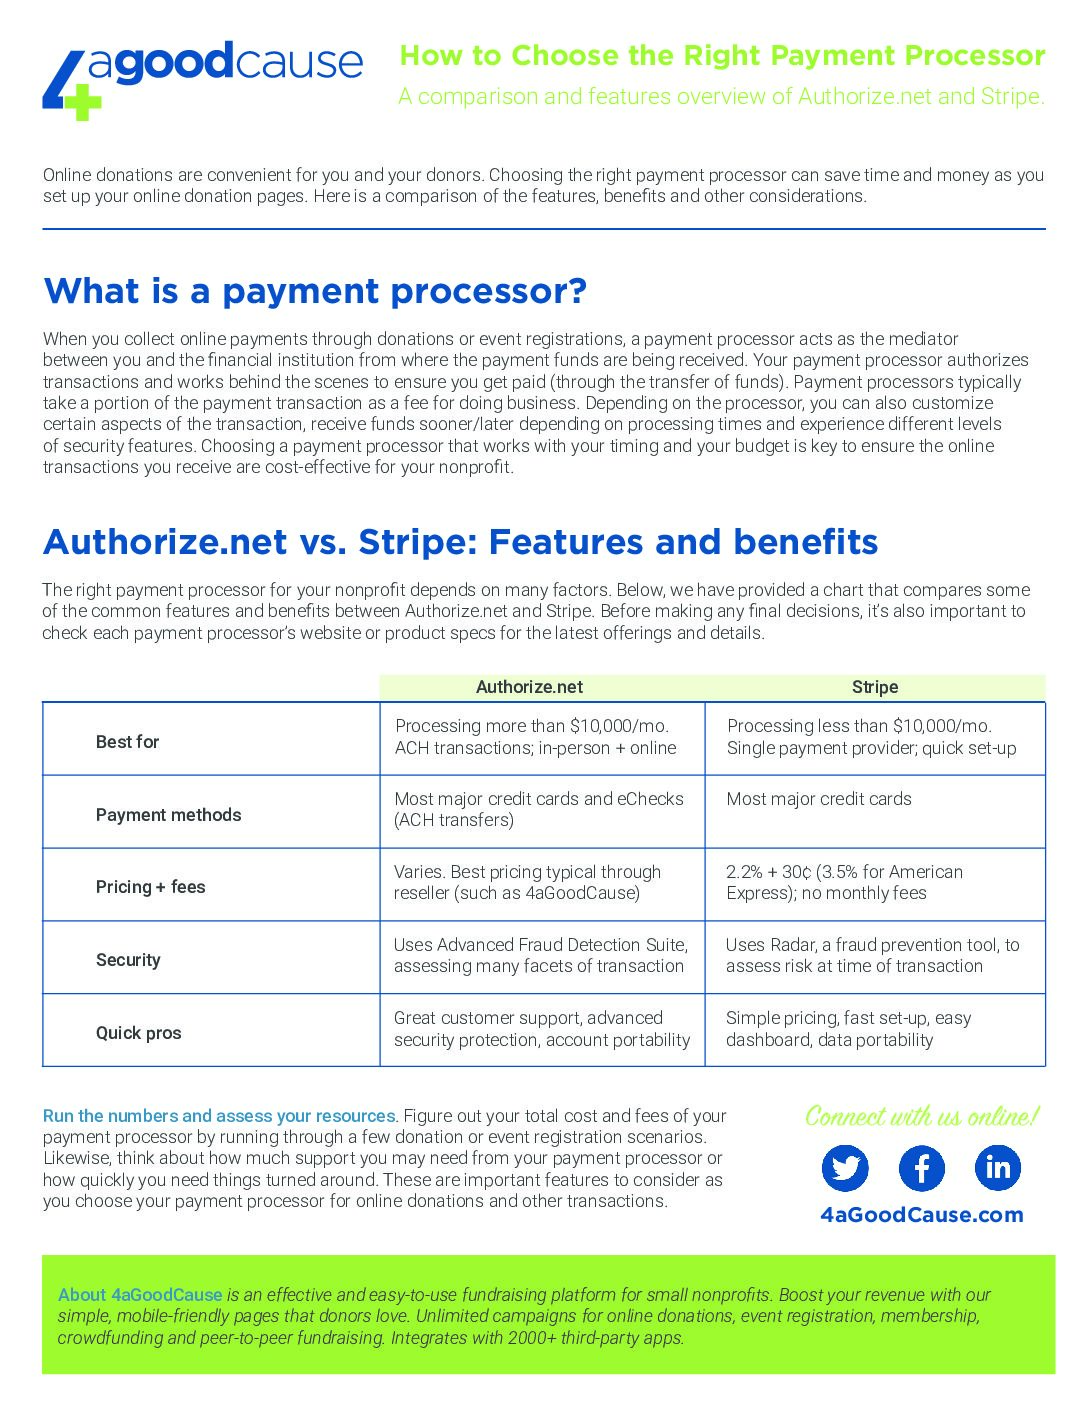 4aGC-Payment-Processors-Guide-2-21